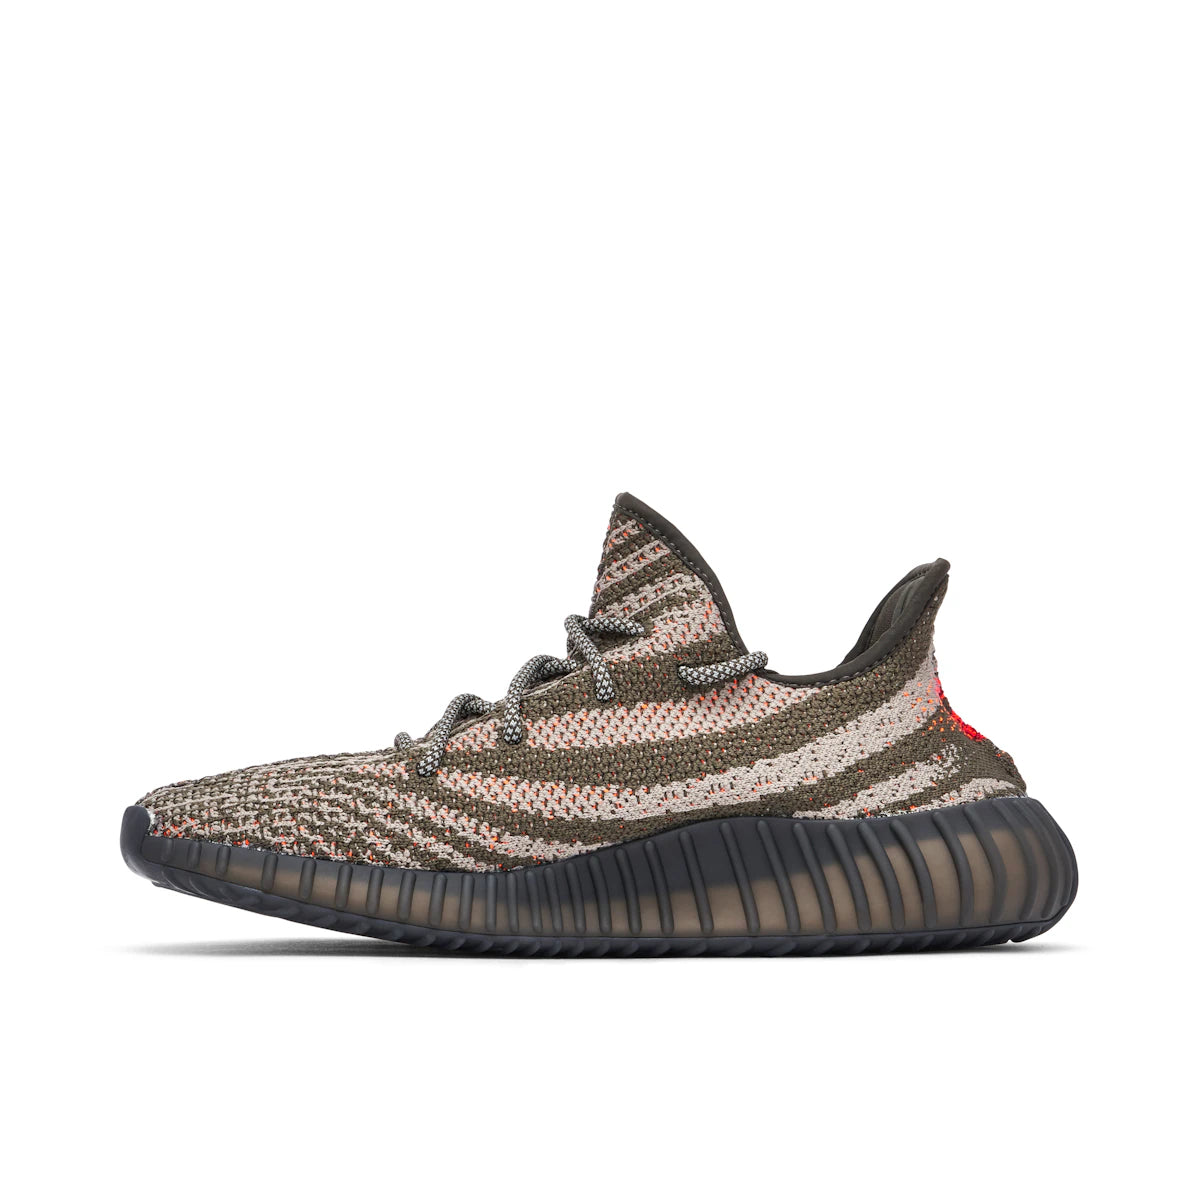 adidas Yeezy Boost 350 V2 Carbon Beluga by Yeezy from £248.00